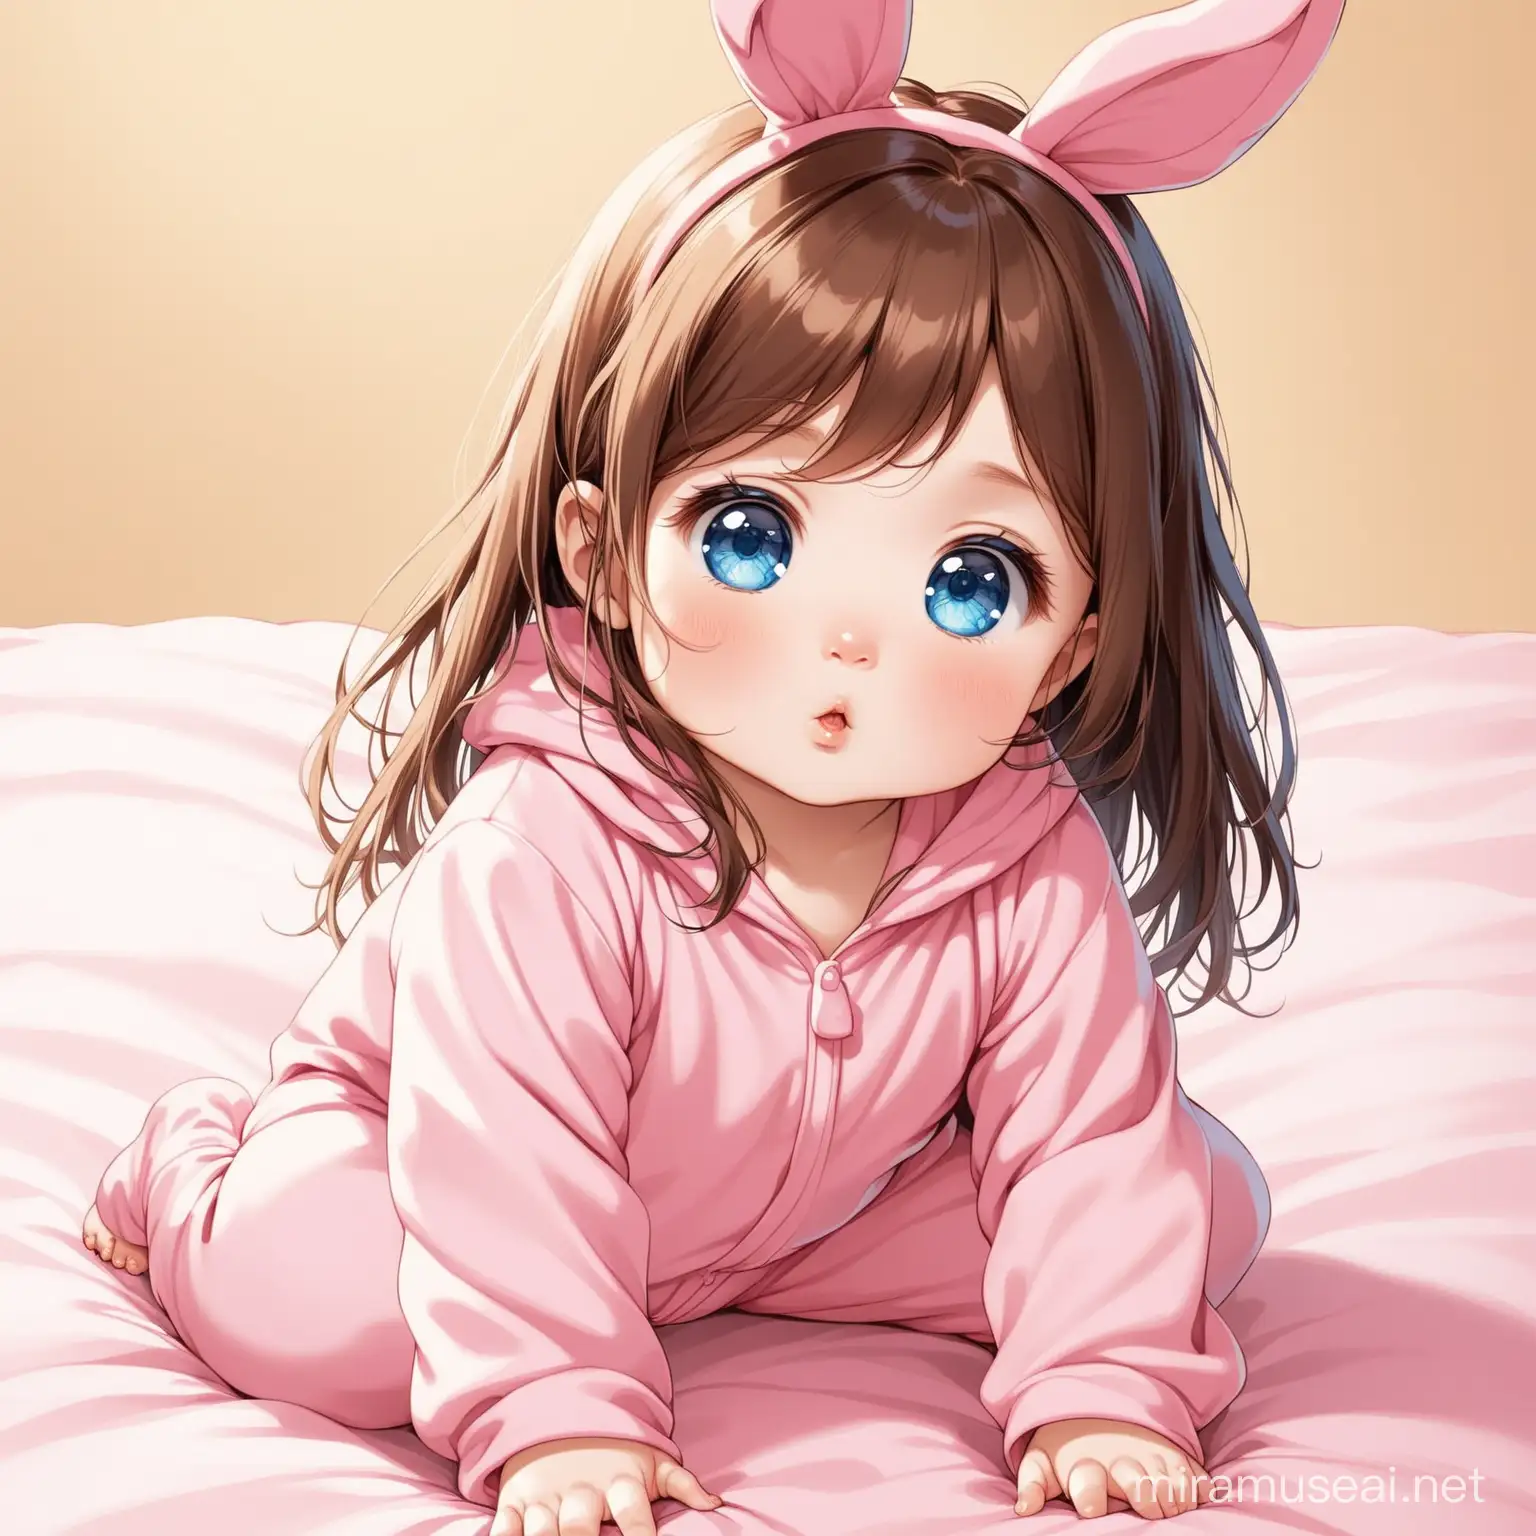 Adorable Baby Girl in Pink Bunny Onesie with Messy Brown Hair